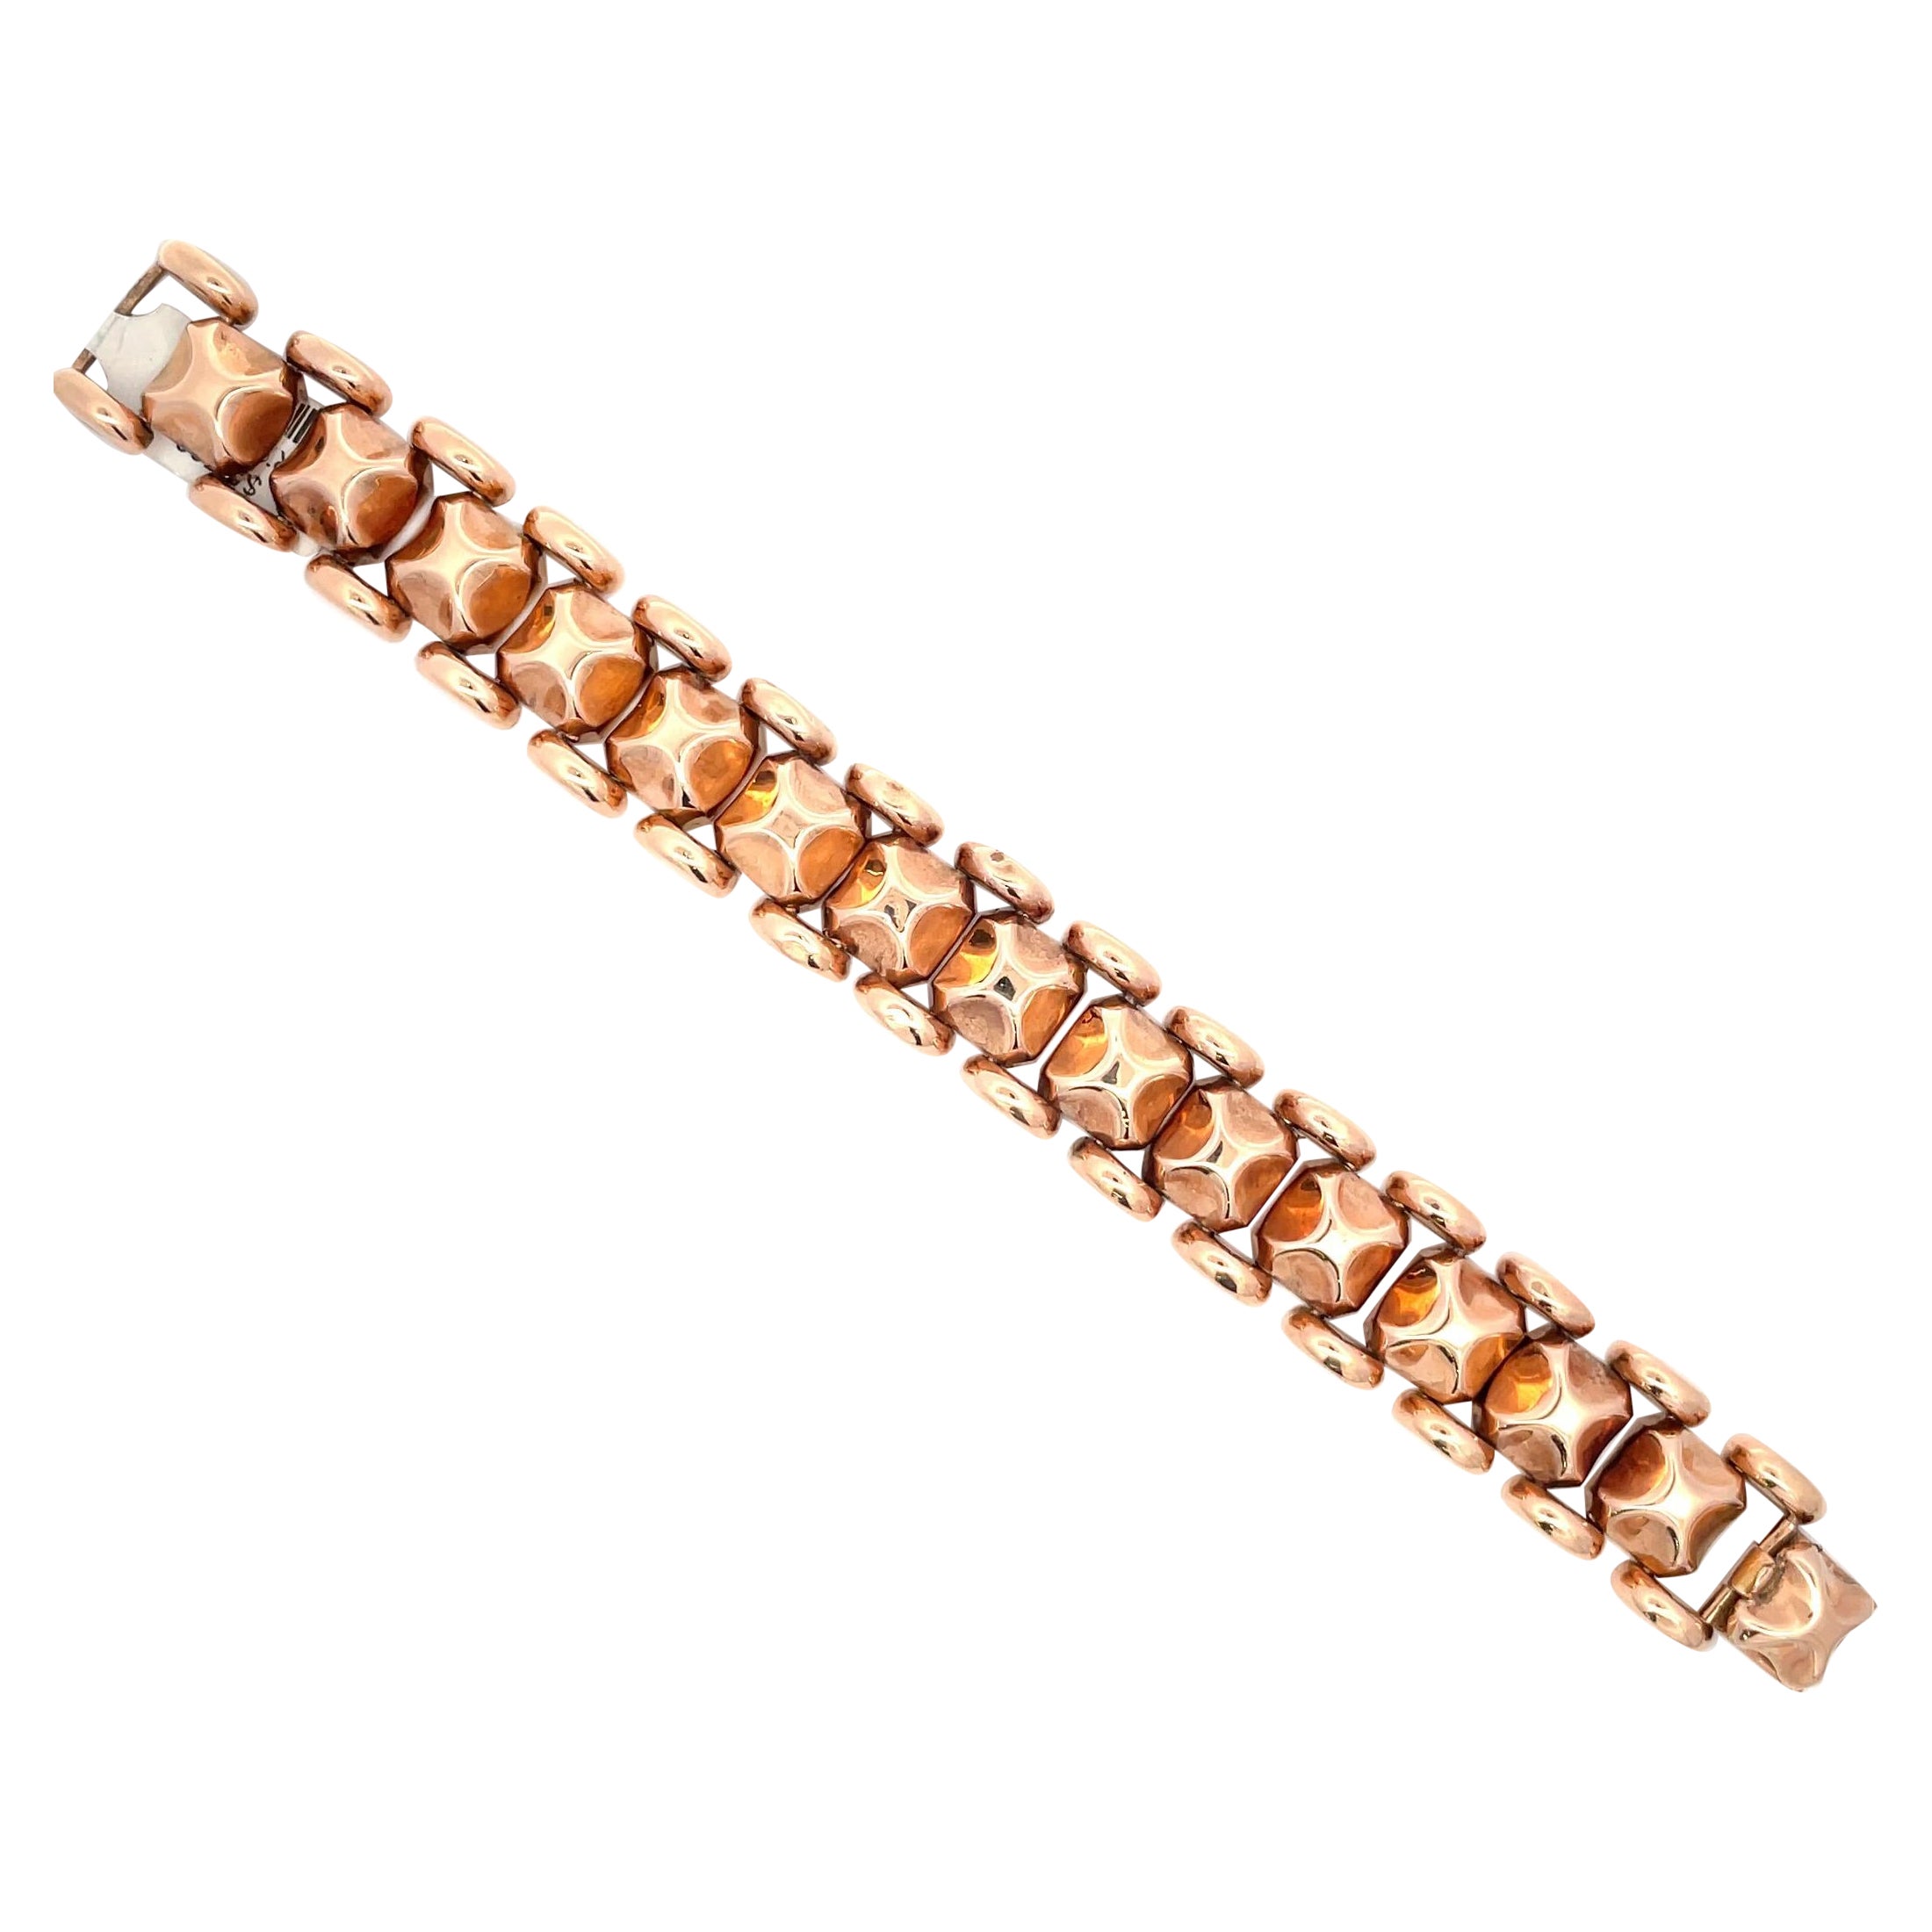 Retro 14 Karat Rose Gold link bracelet weighing 48.8 grams. 
Can be shortened.
DM for price, videos & pictures.
Search Harbor Diamonds for more link bracelets. 